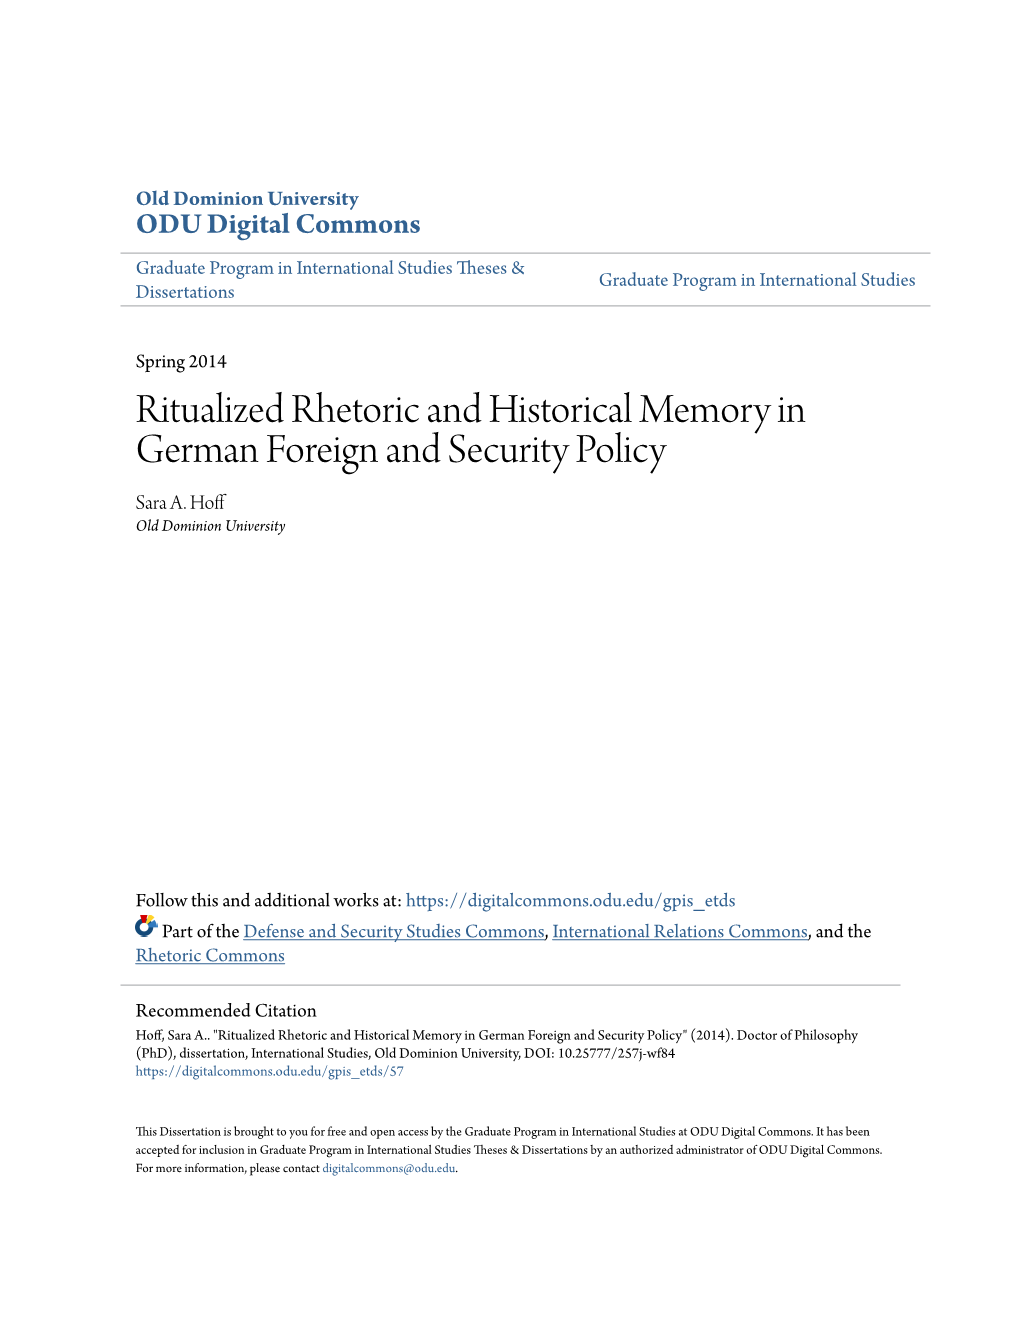 Ritualized Rhetoric and Historical Memory in German Foreign and Security Policy Sara A